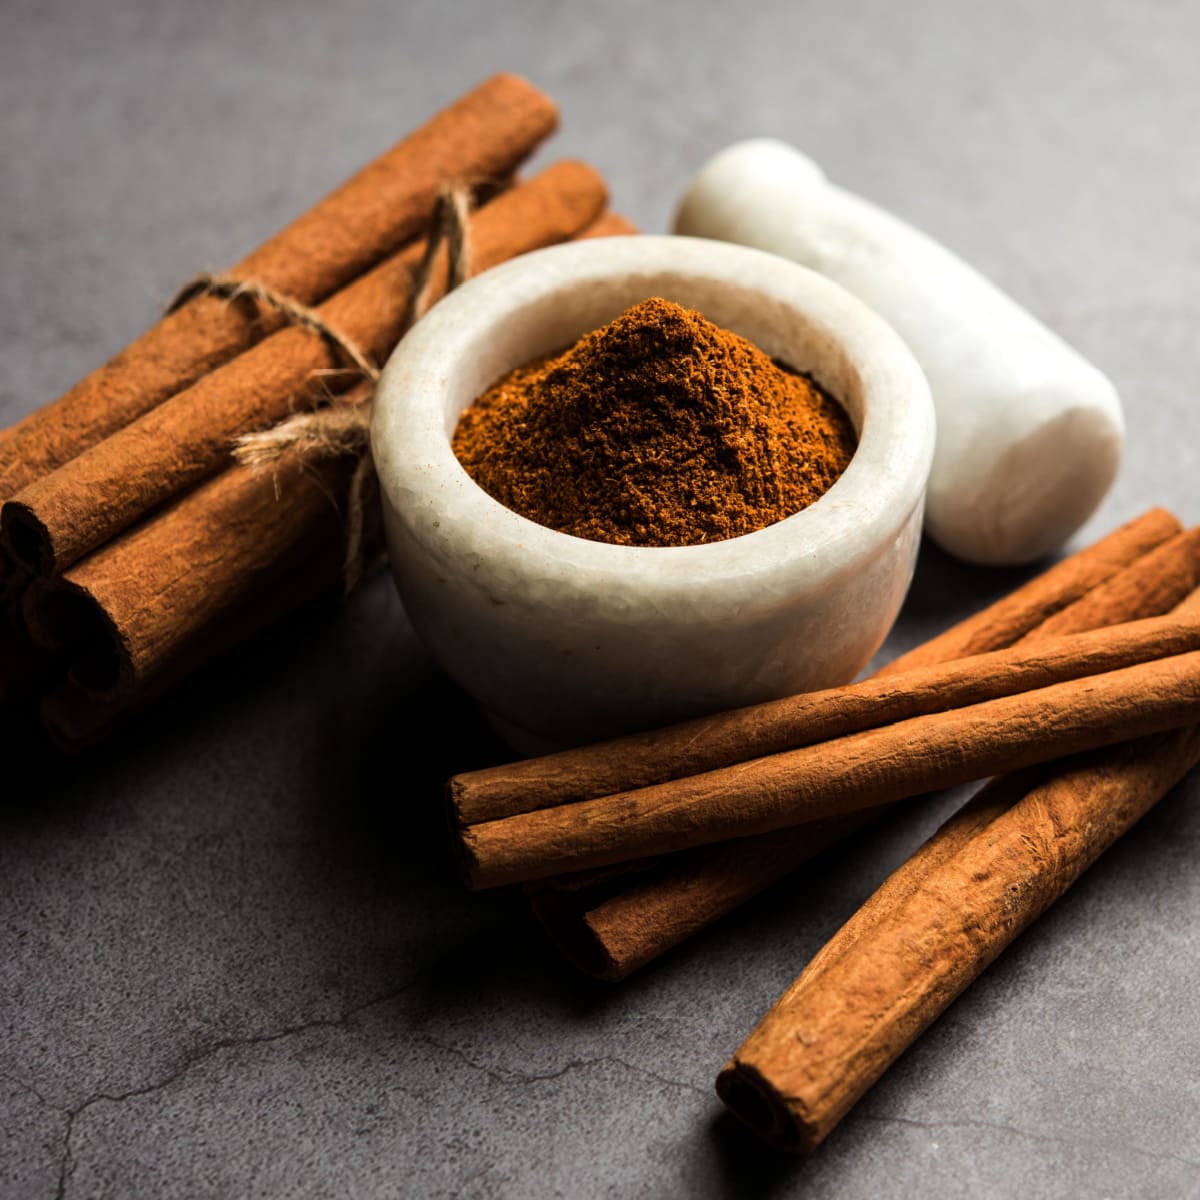 Cinnamon Stick Bundles Next to a Pestle and Mortar Filled With Powdered Cinnamon